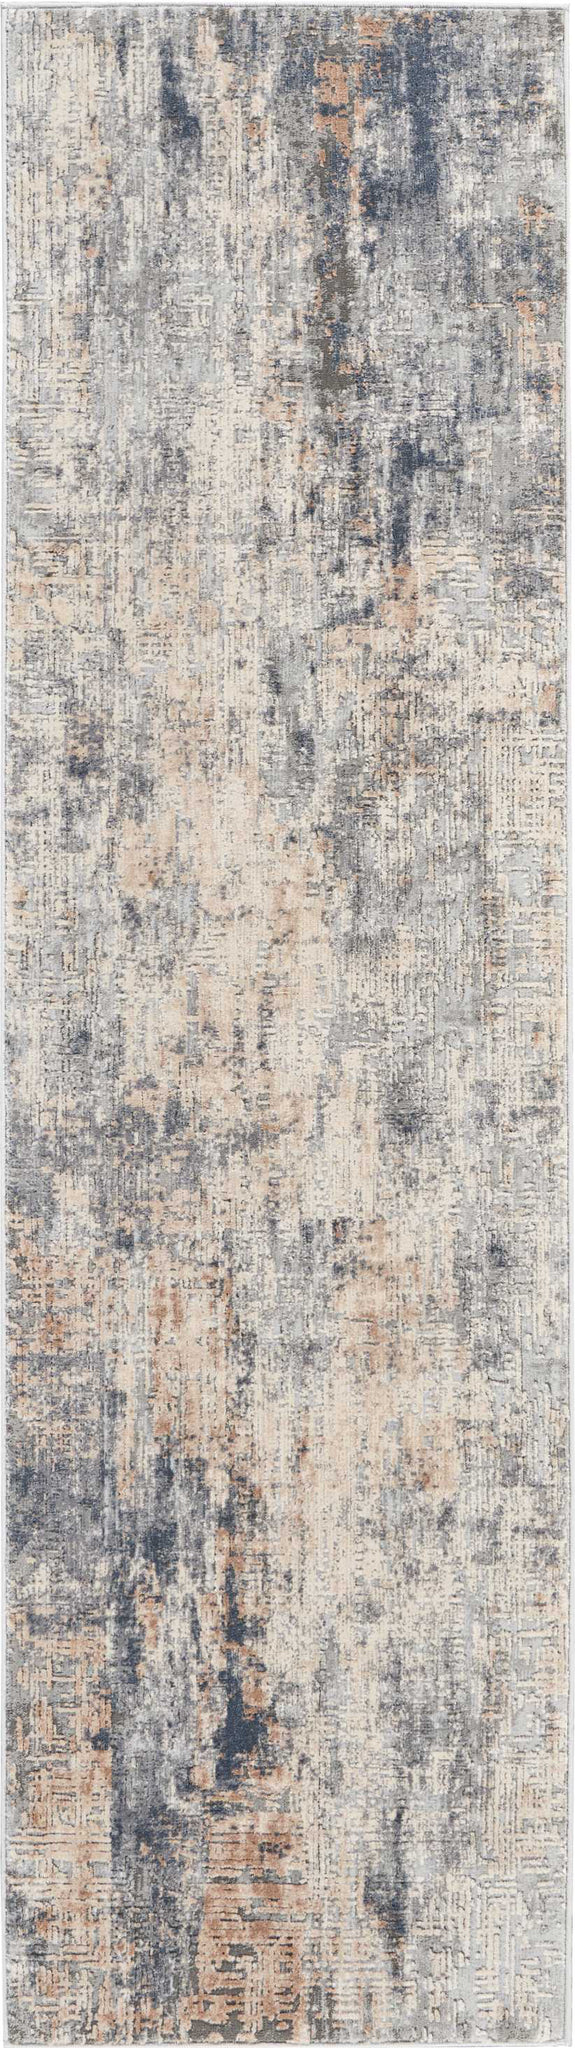 Rustic Textures RUS02 Decor Blue/Ivory Rug – Incredible Nourison Area by Rugs and